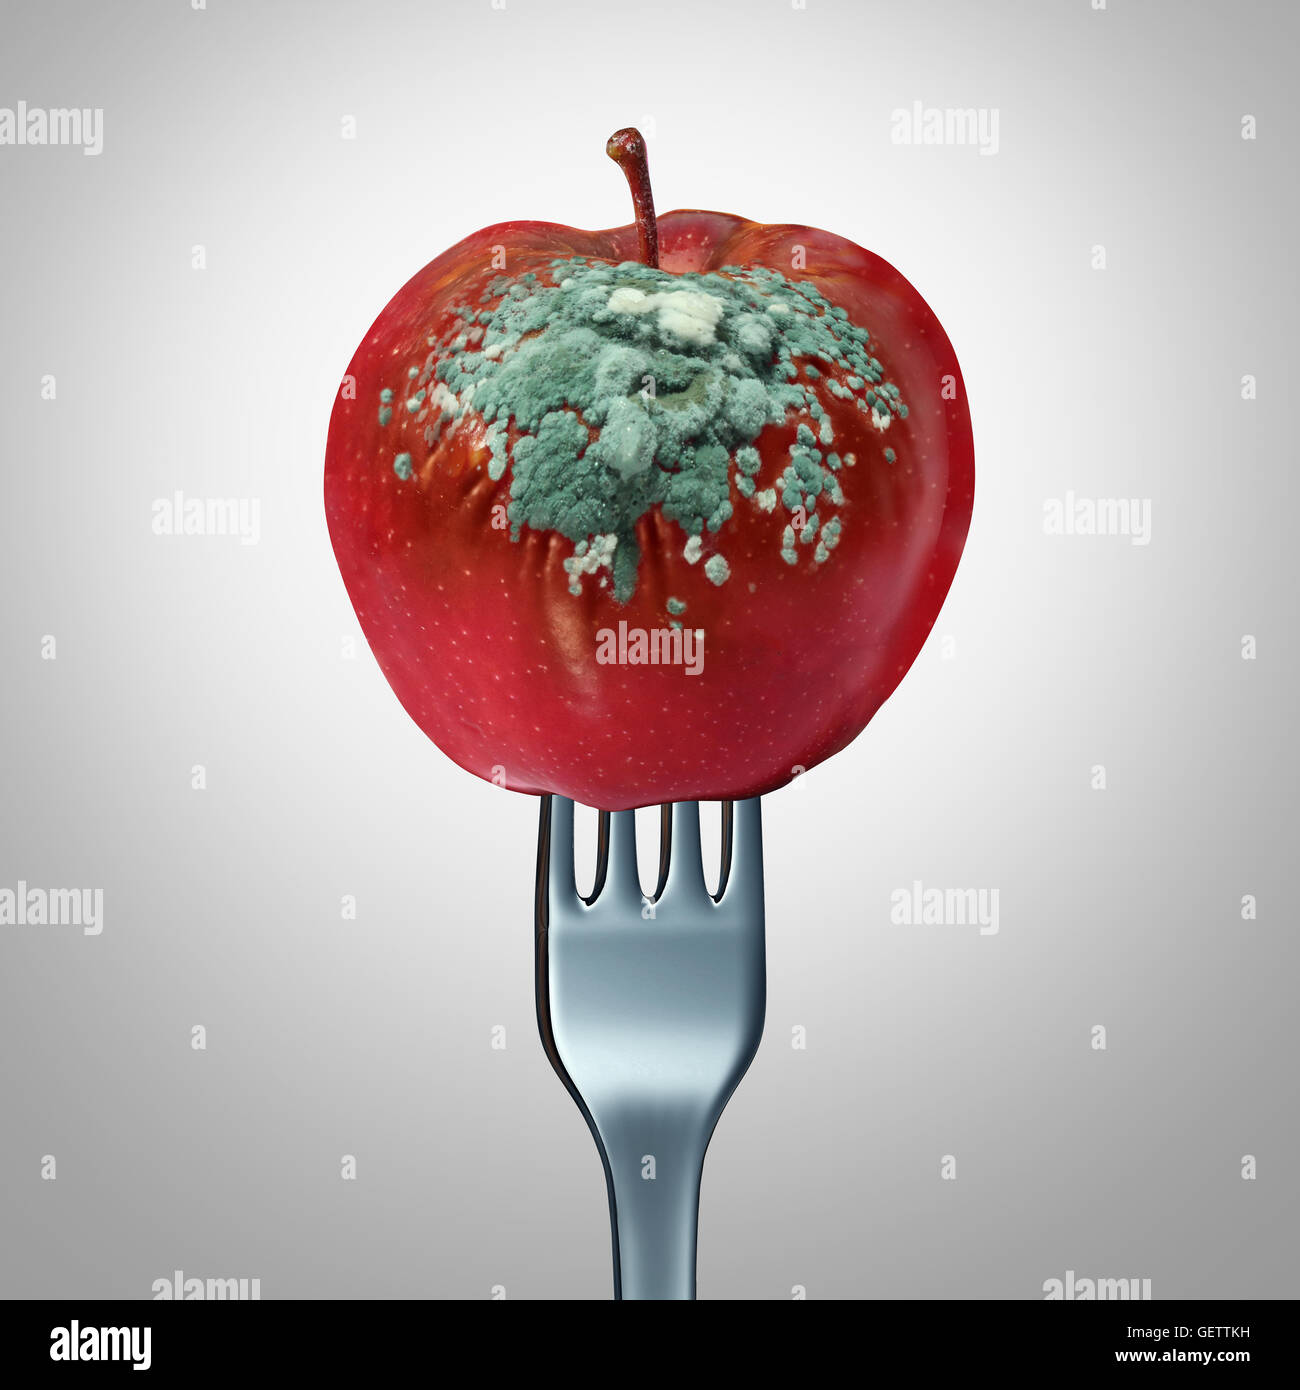 Rotten food symbol and spoiled awful meal concept as a fork holding a spoiled apple with fungus growing with 3D illustration elements as a metaphor for meals that are not fresh. Stock Photo